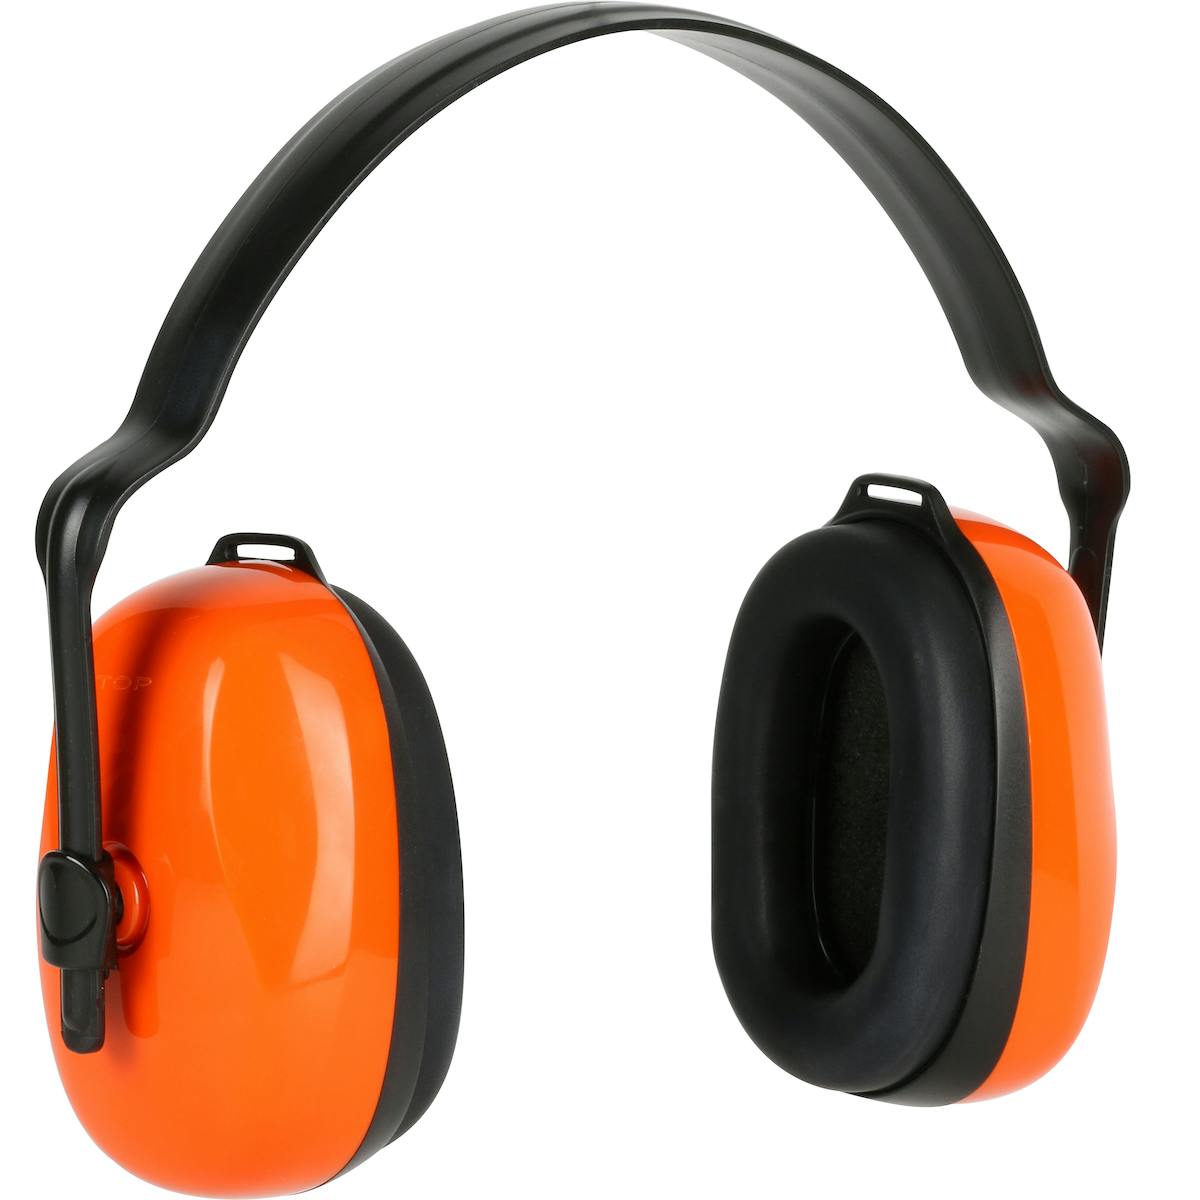 Passive Ear Muffs with Adjustable Headband - NRR 24, Orange (263-NP110) - OS_0